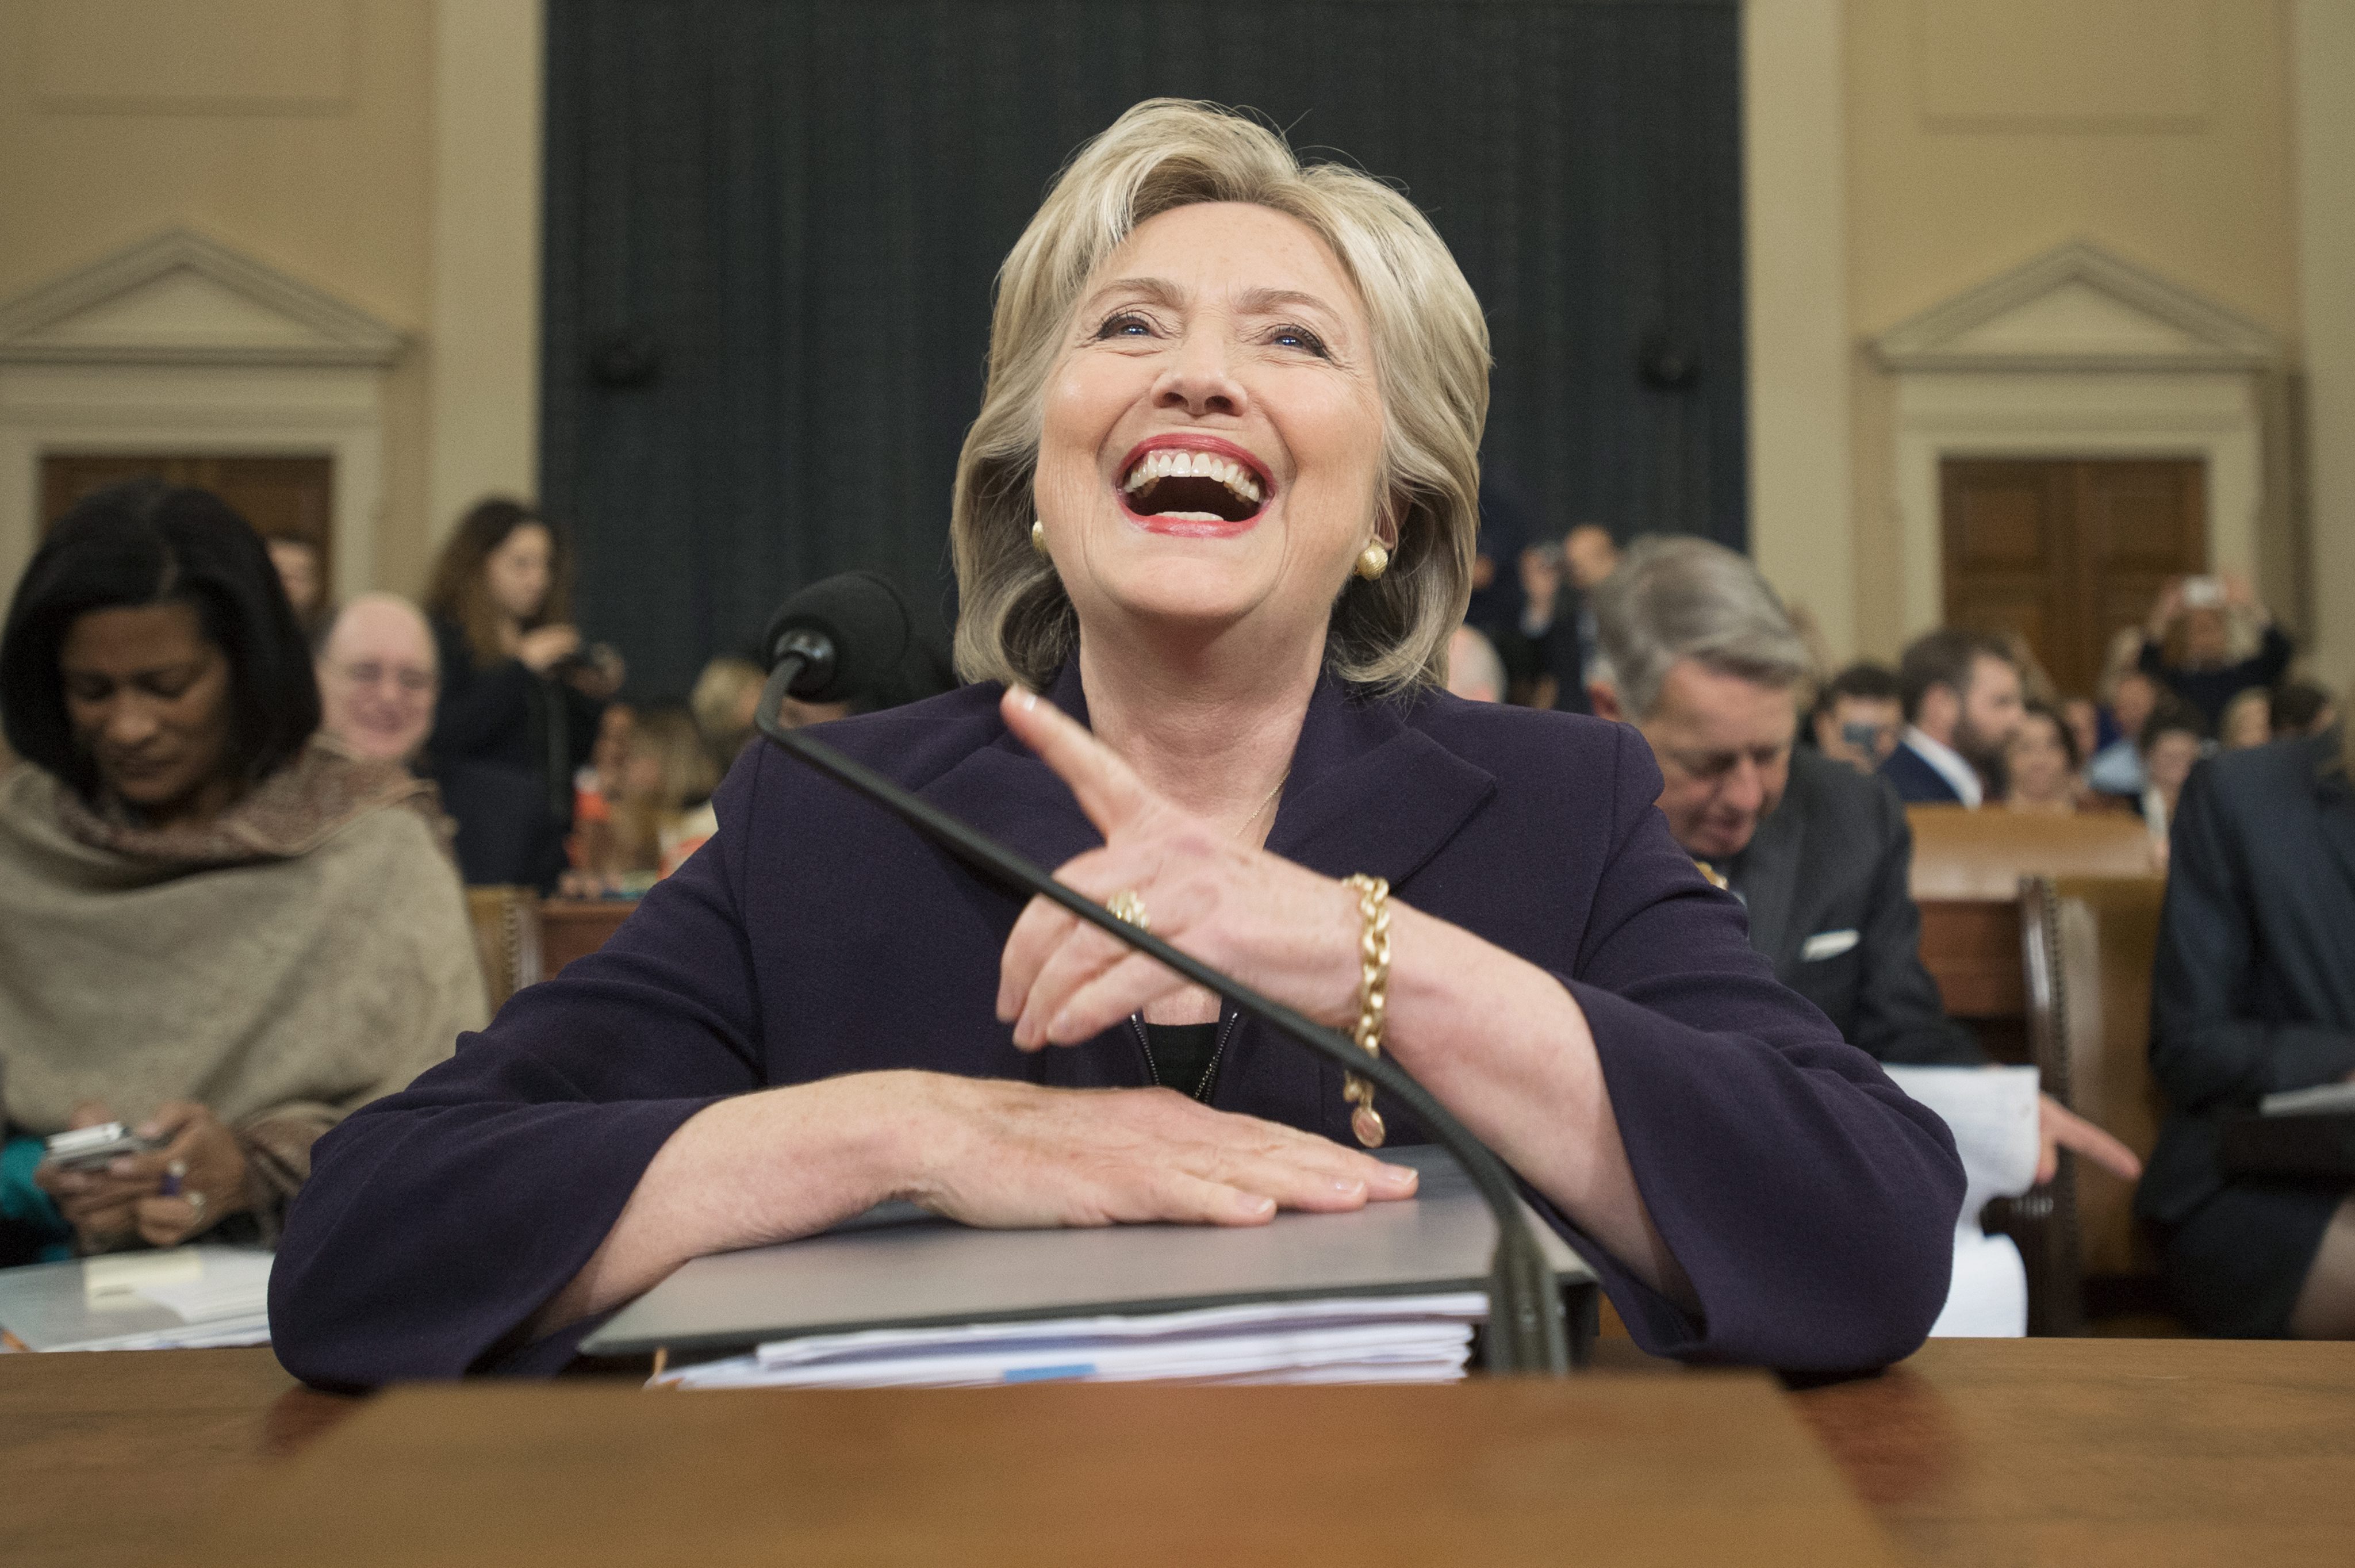 epa04990239 Former Secretary of State and Democratic presidential candidate Hillary Clinton laughs after returning from a break in testifying at the House Select Committee on Benghazi, on Capitol Hill in Washington DC, USA, 22 October 2015. Clinton faces scrutiny over her response to the the 11 September 2012 attack on the US diplomatic compound in Benghazi, Libya; and her use of a private email server while holding the position of Secretary of State. EPA/MICHAEL REYNOLDS